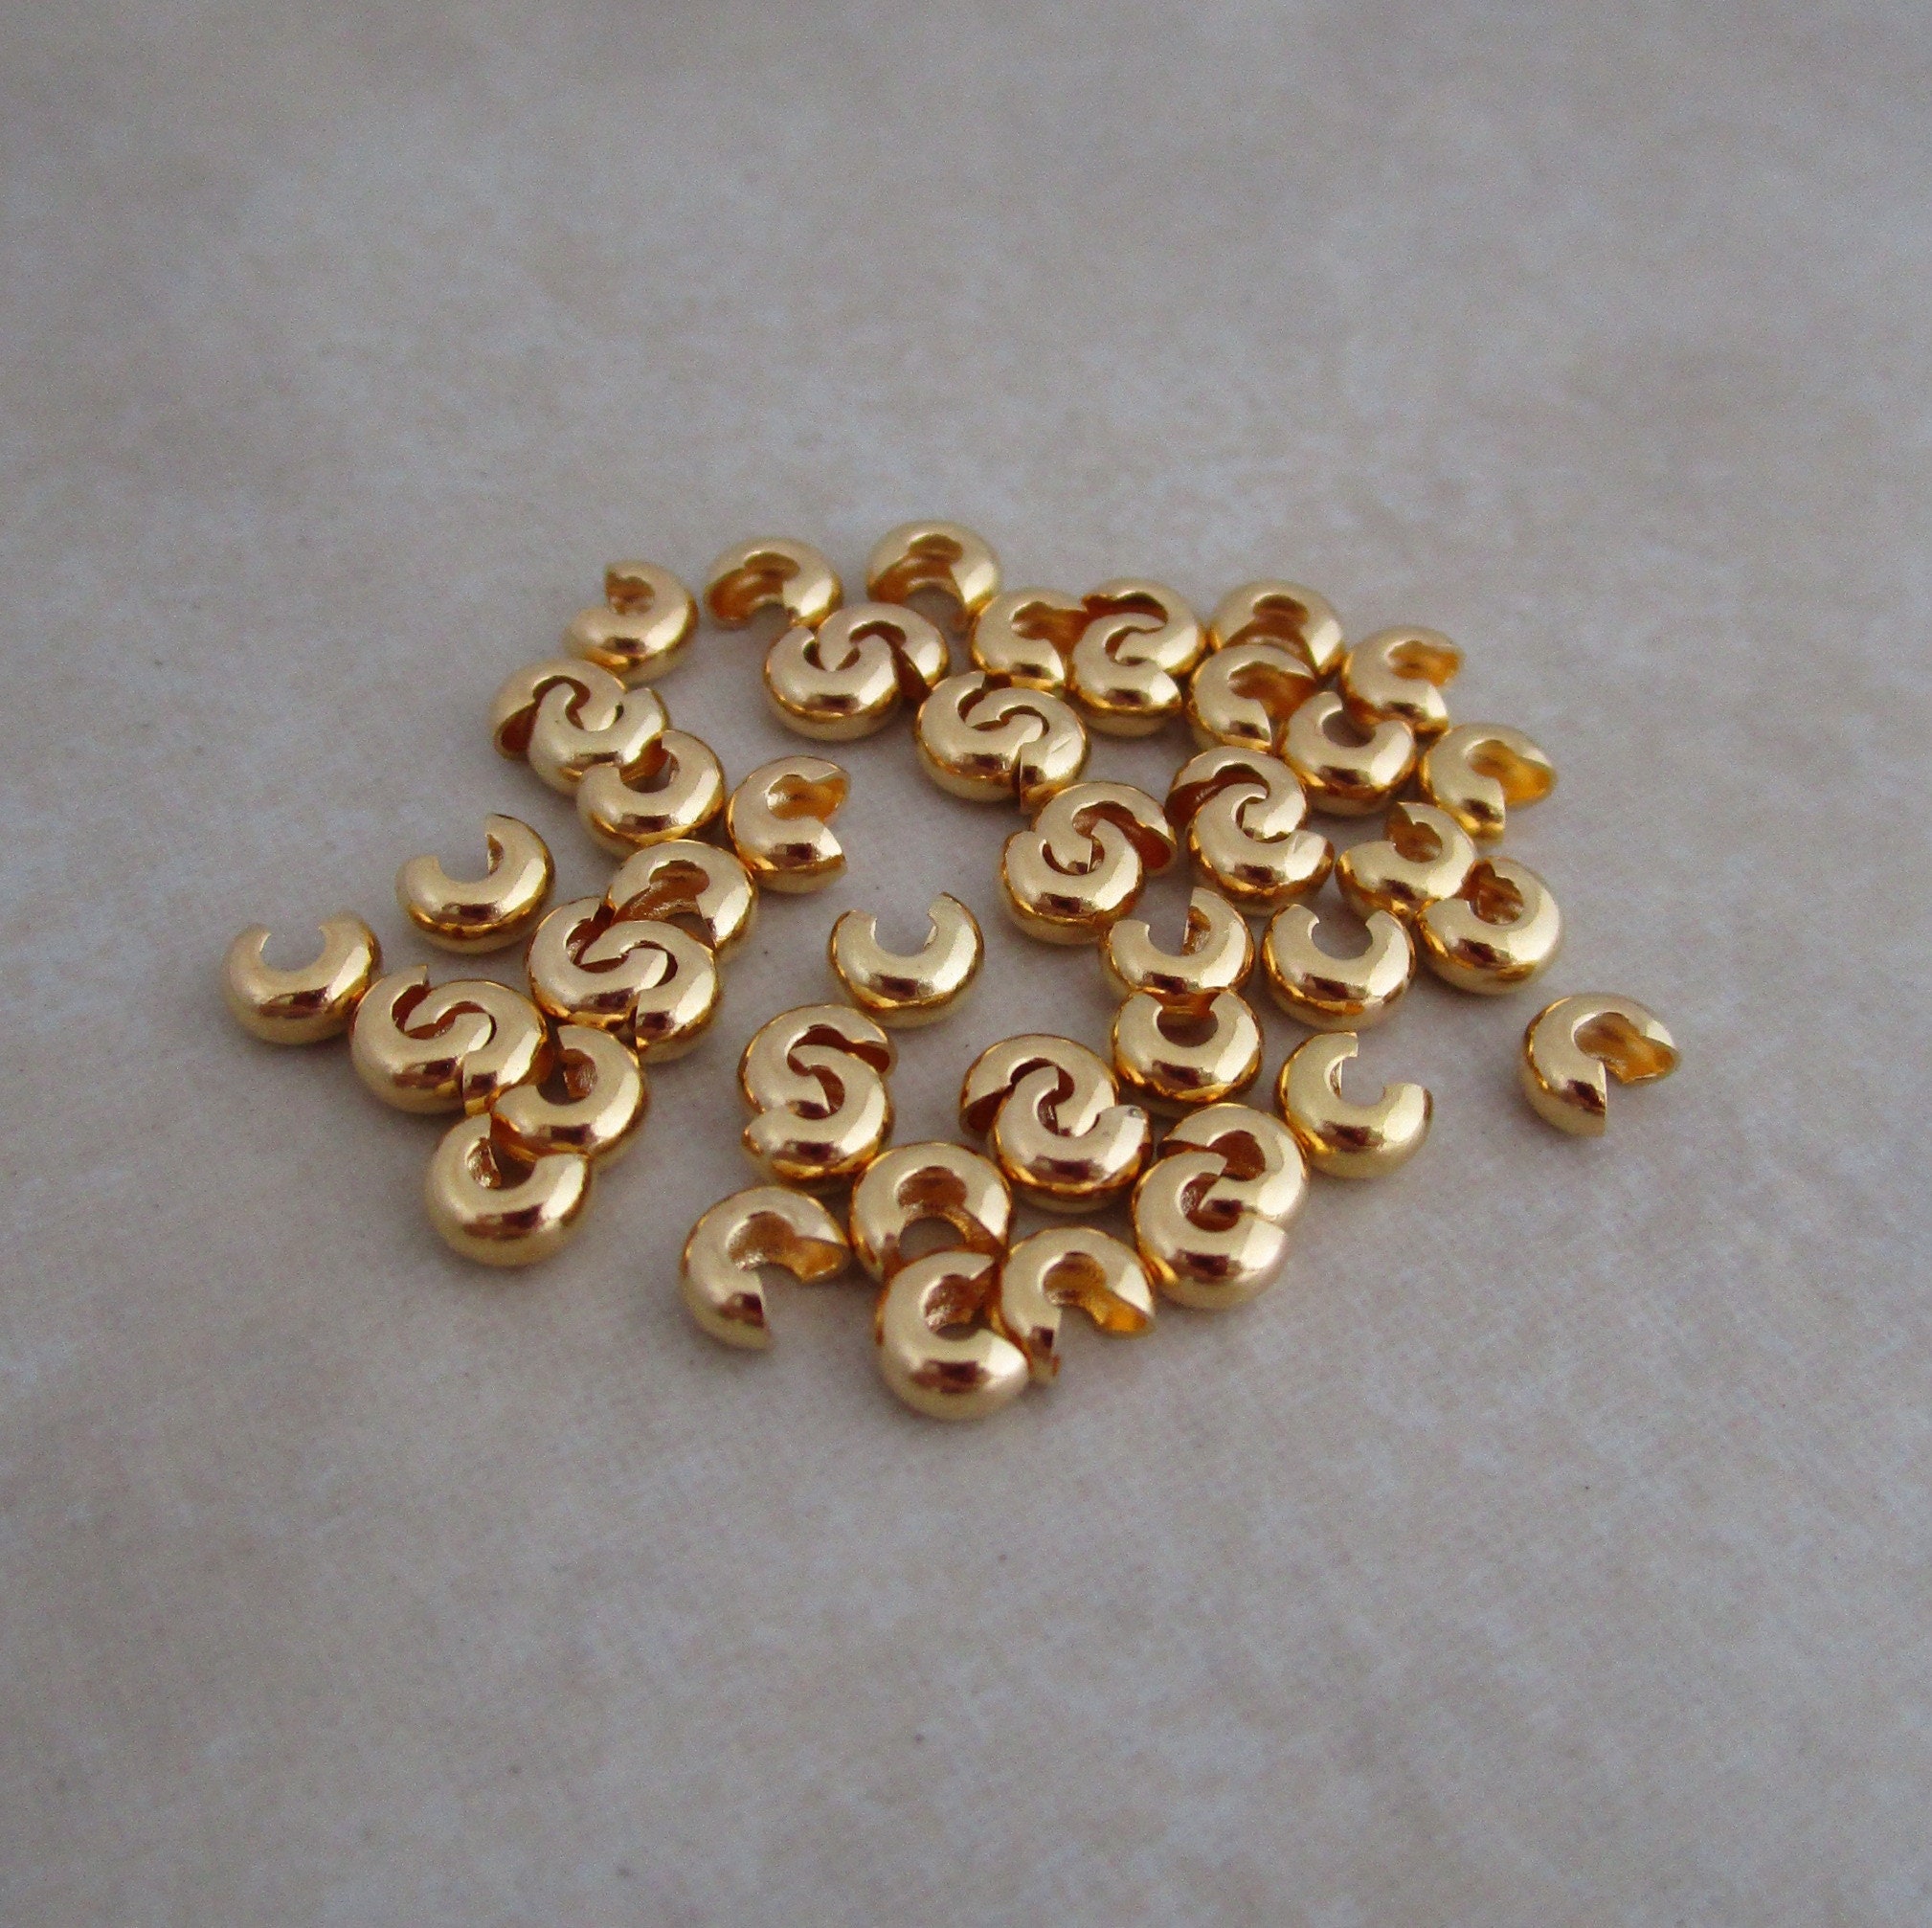 5mm Rose Gold Plated Crimp Covers, Knot Covers Component For Jewelry  Making, Jewelry Findings, Rose Gold Plated Findings - 120pcs